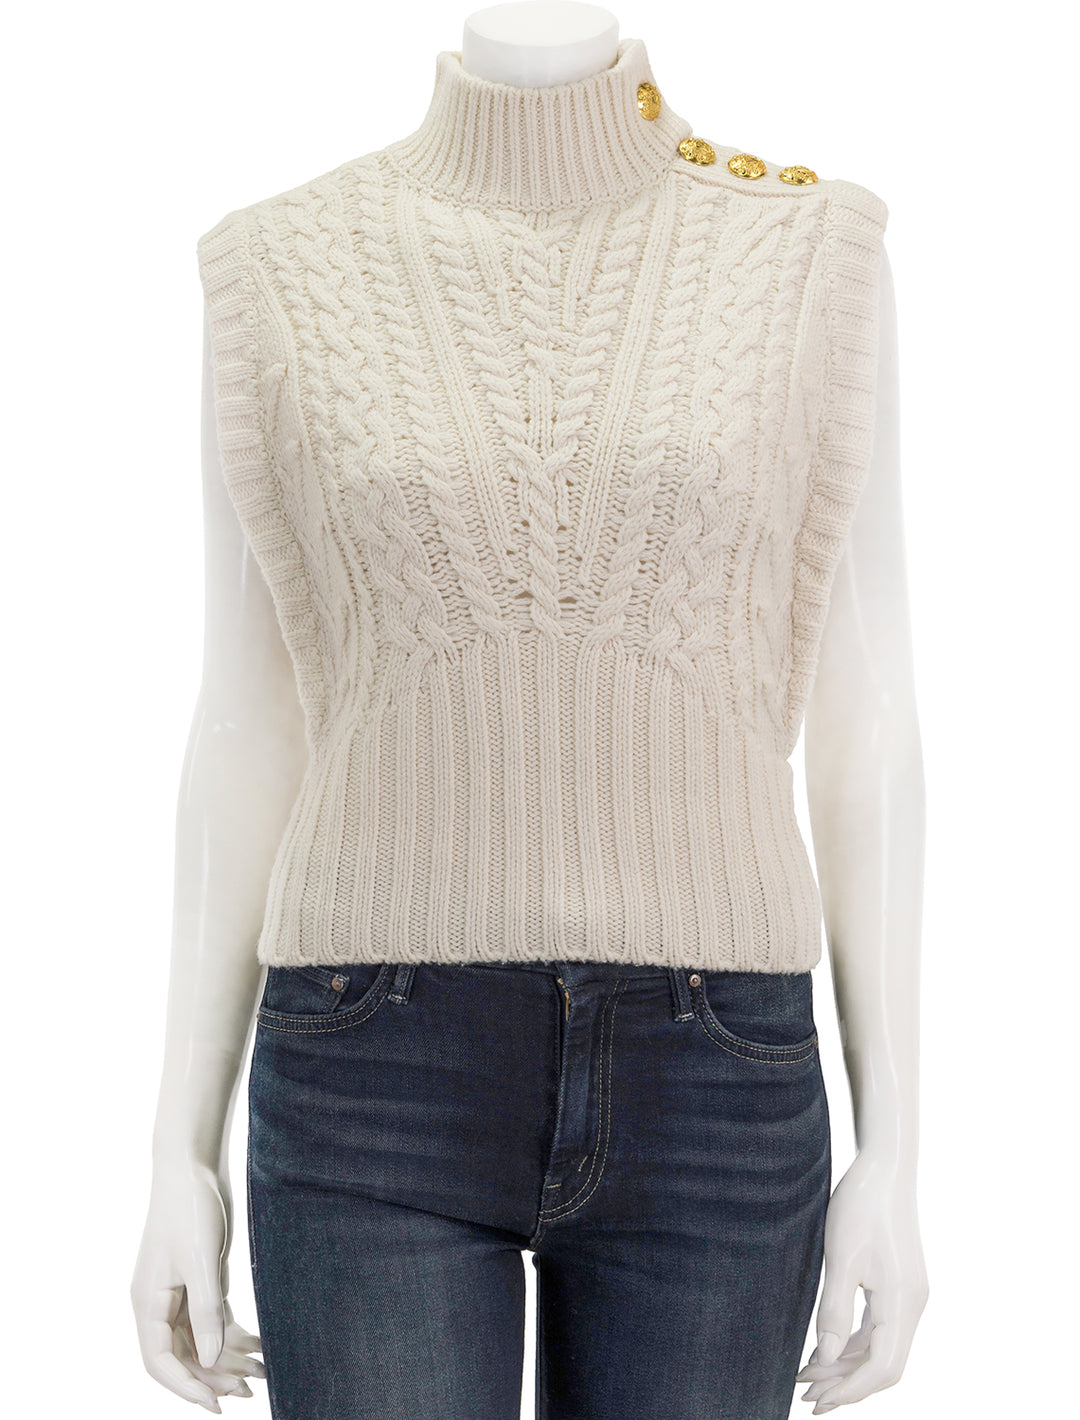 Front view of Veronica Beard's holton knit vest in off white.